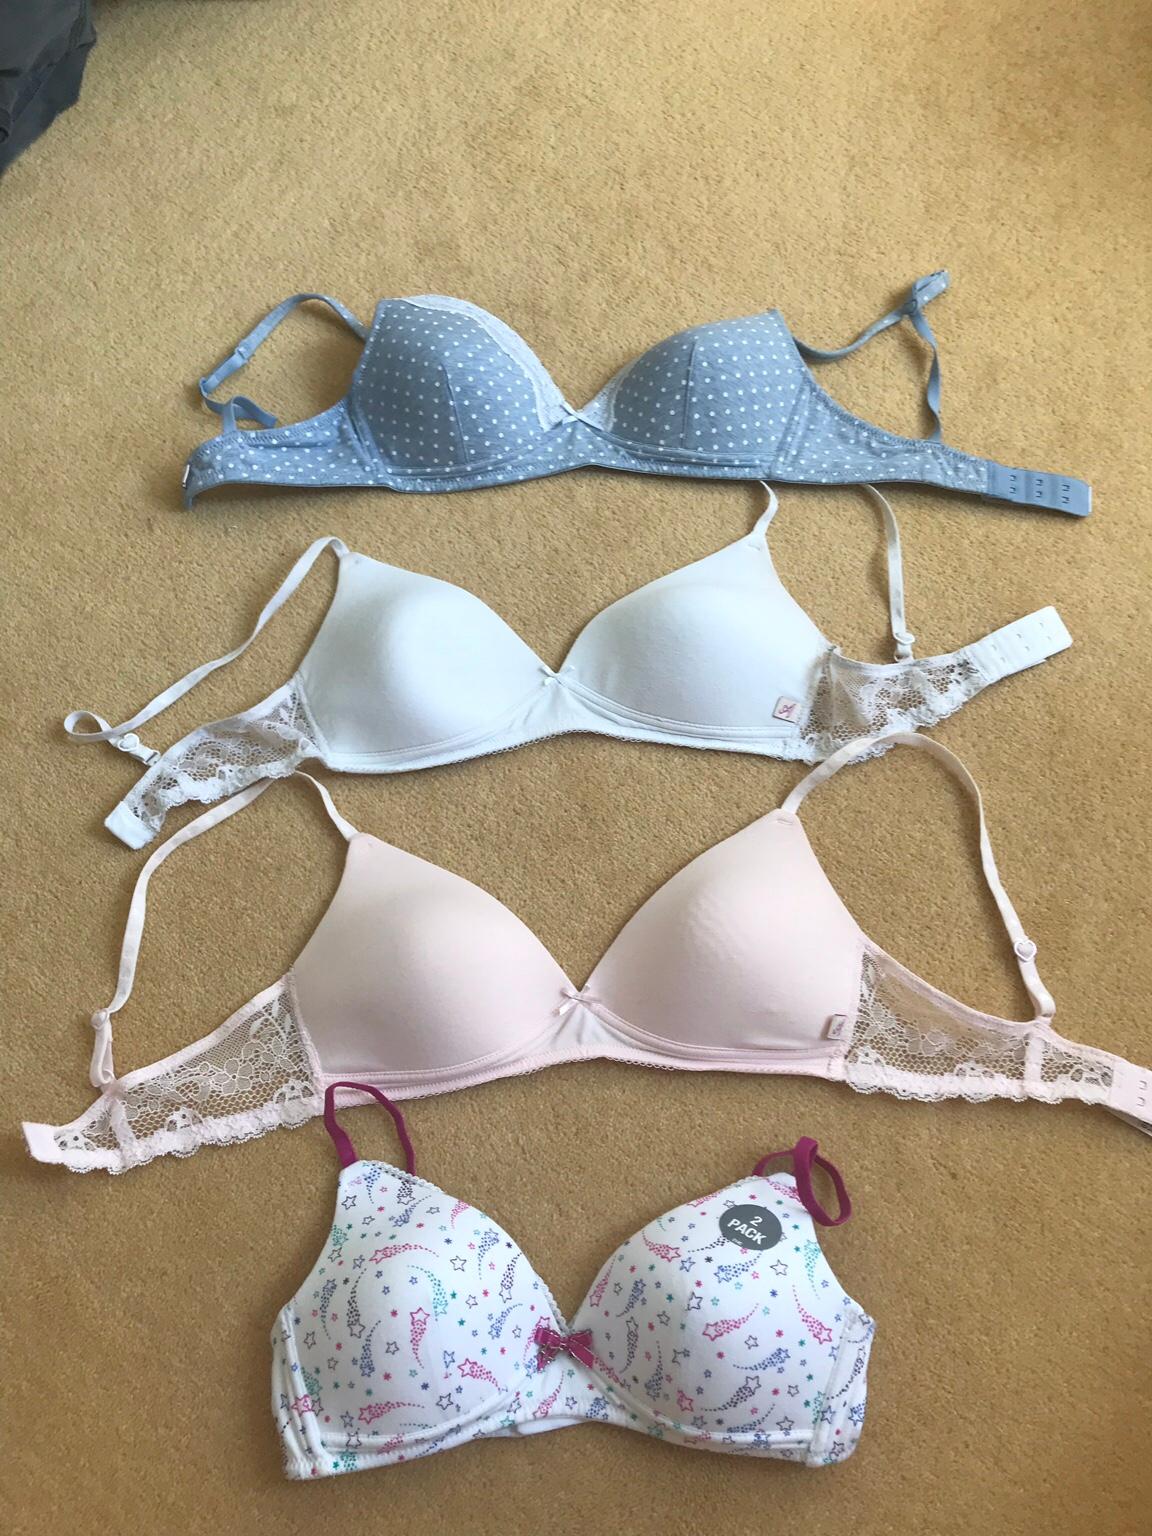 Girls Angel Bras - M and S in B91 Solihull for £6.00 for sale